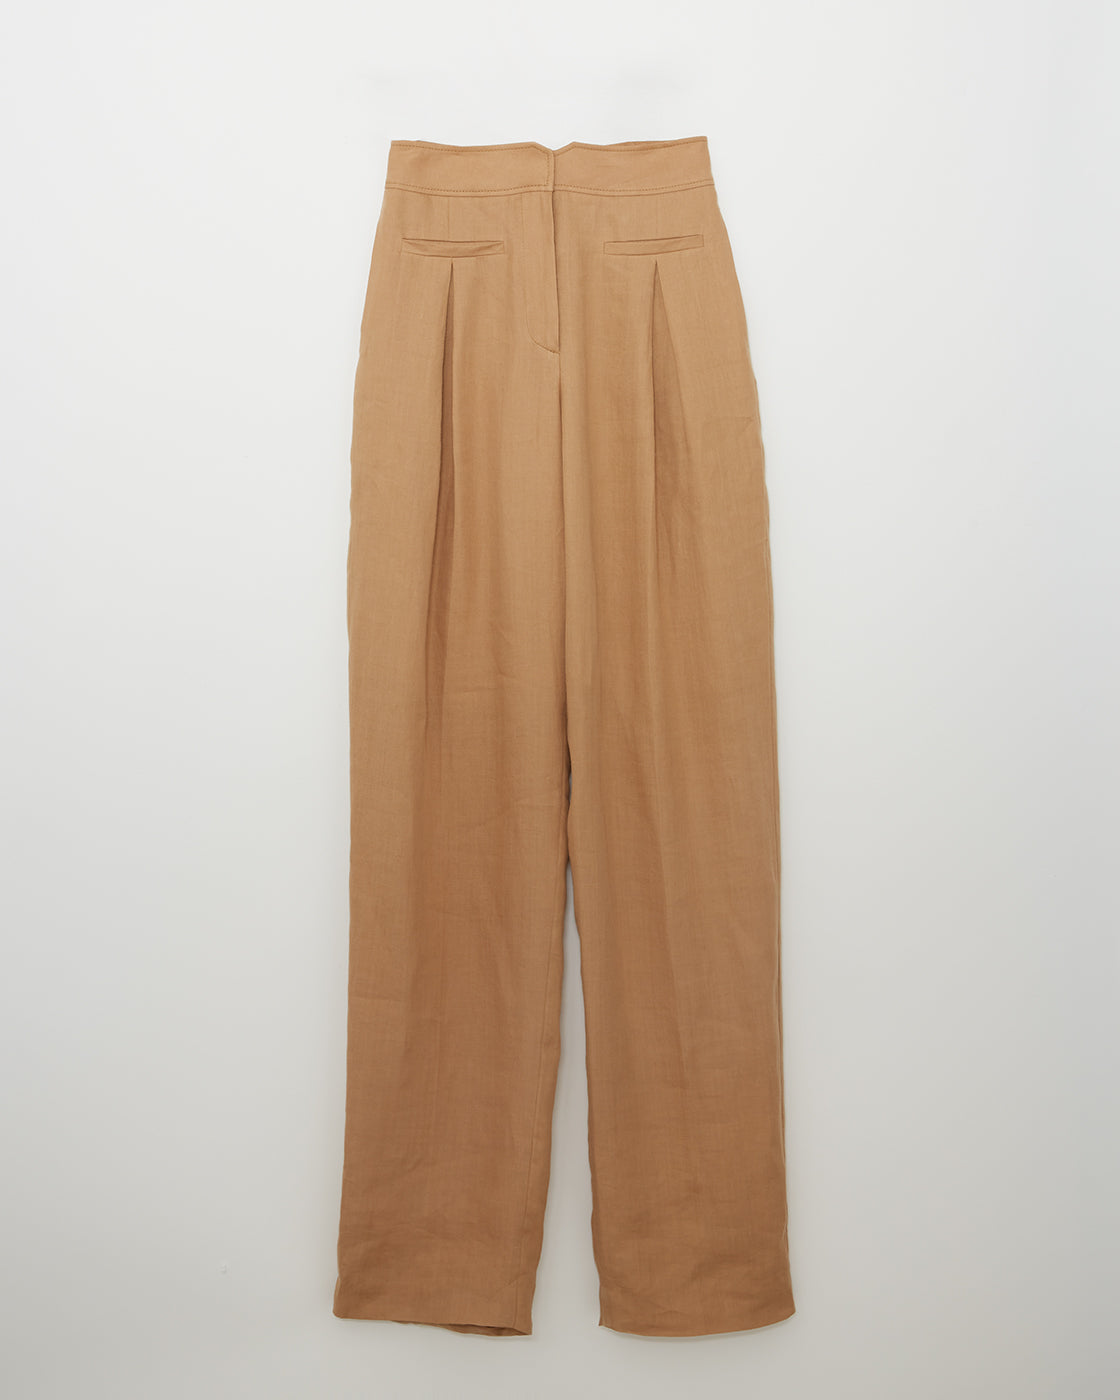 Piper Trousers Linen Beige - Special Price